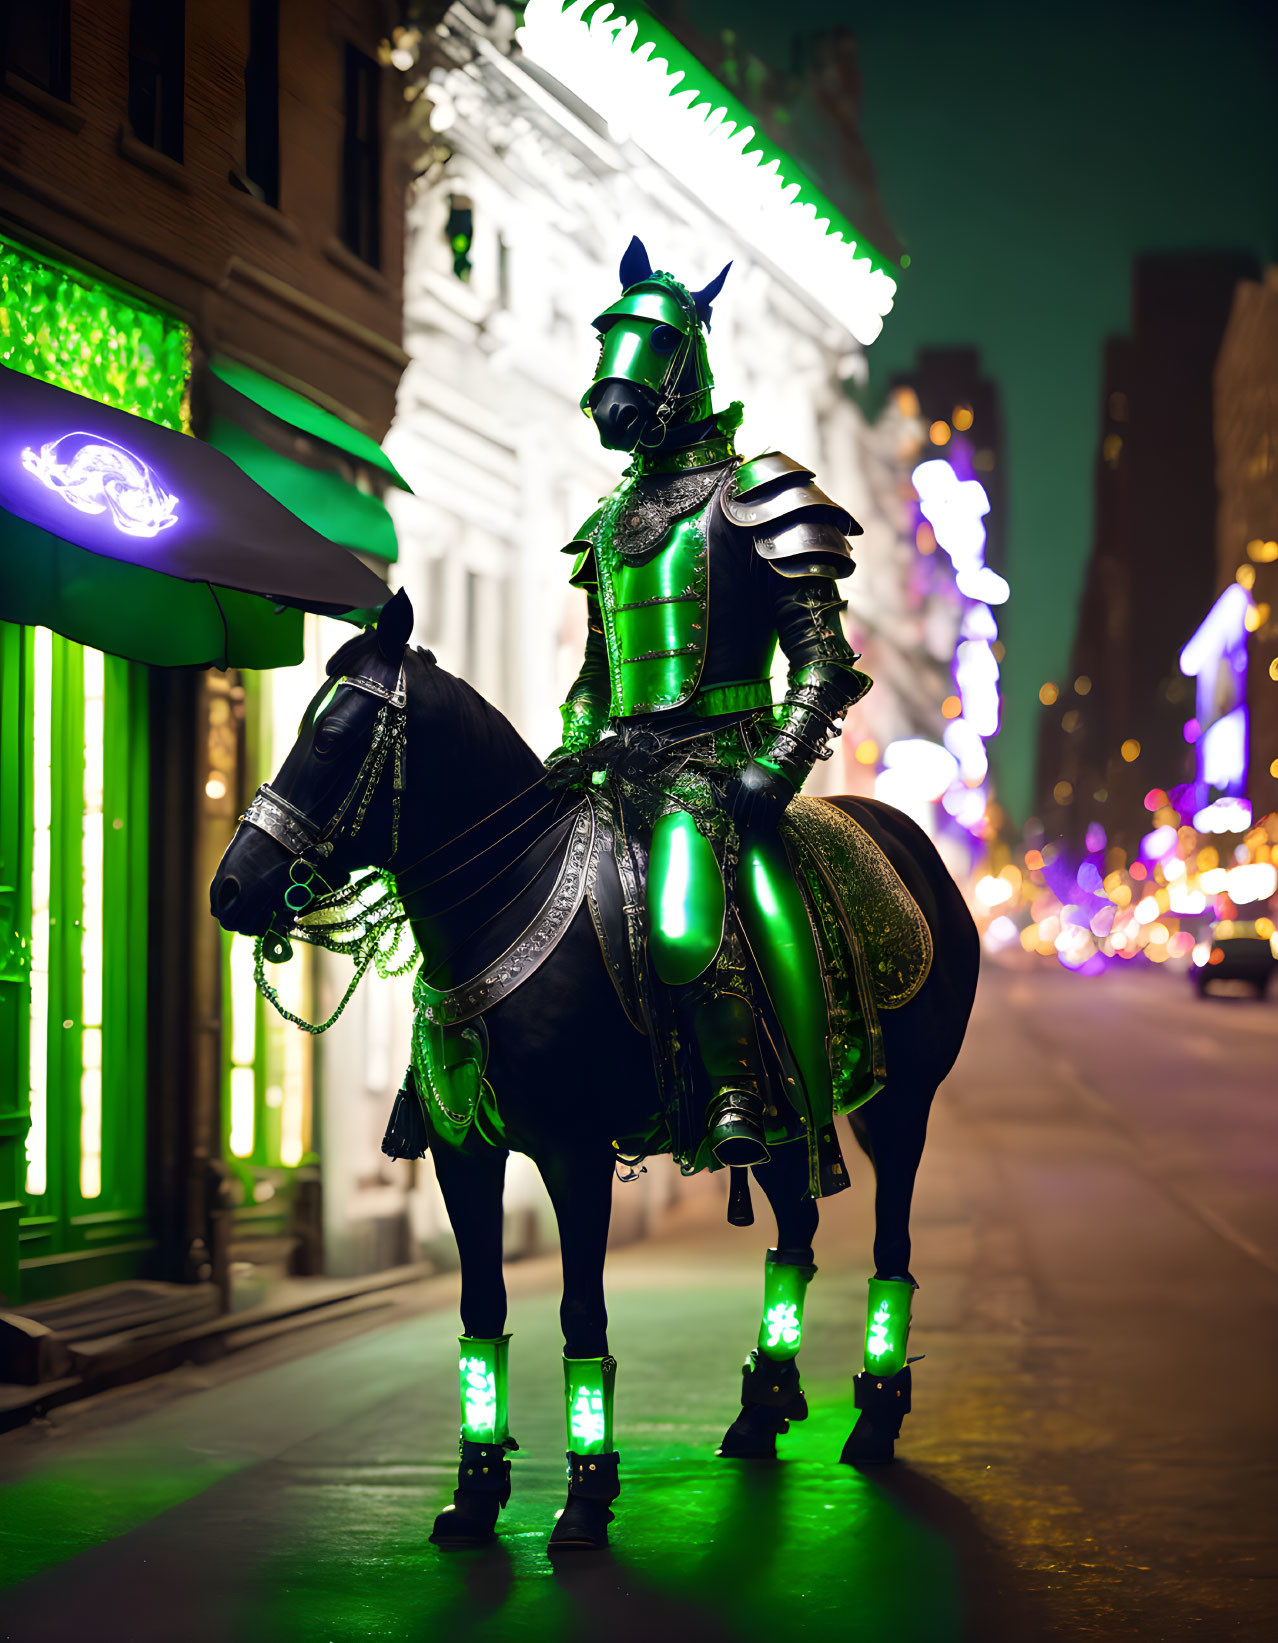 Glowing medieval knight on horse in urban night scene